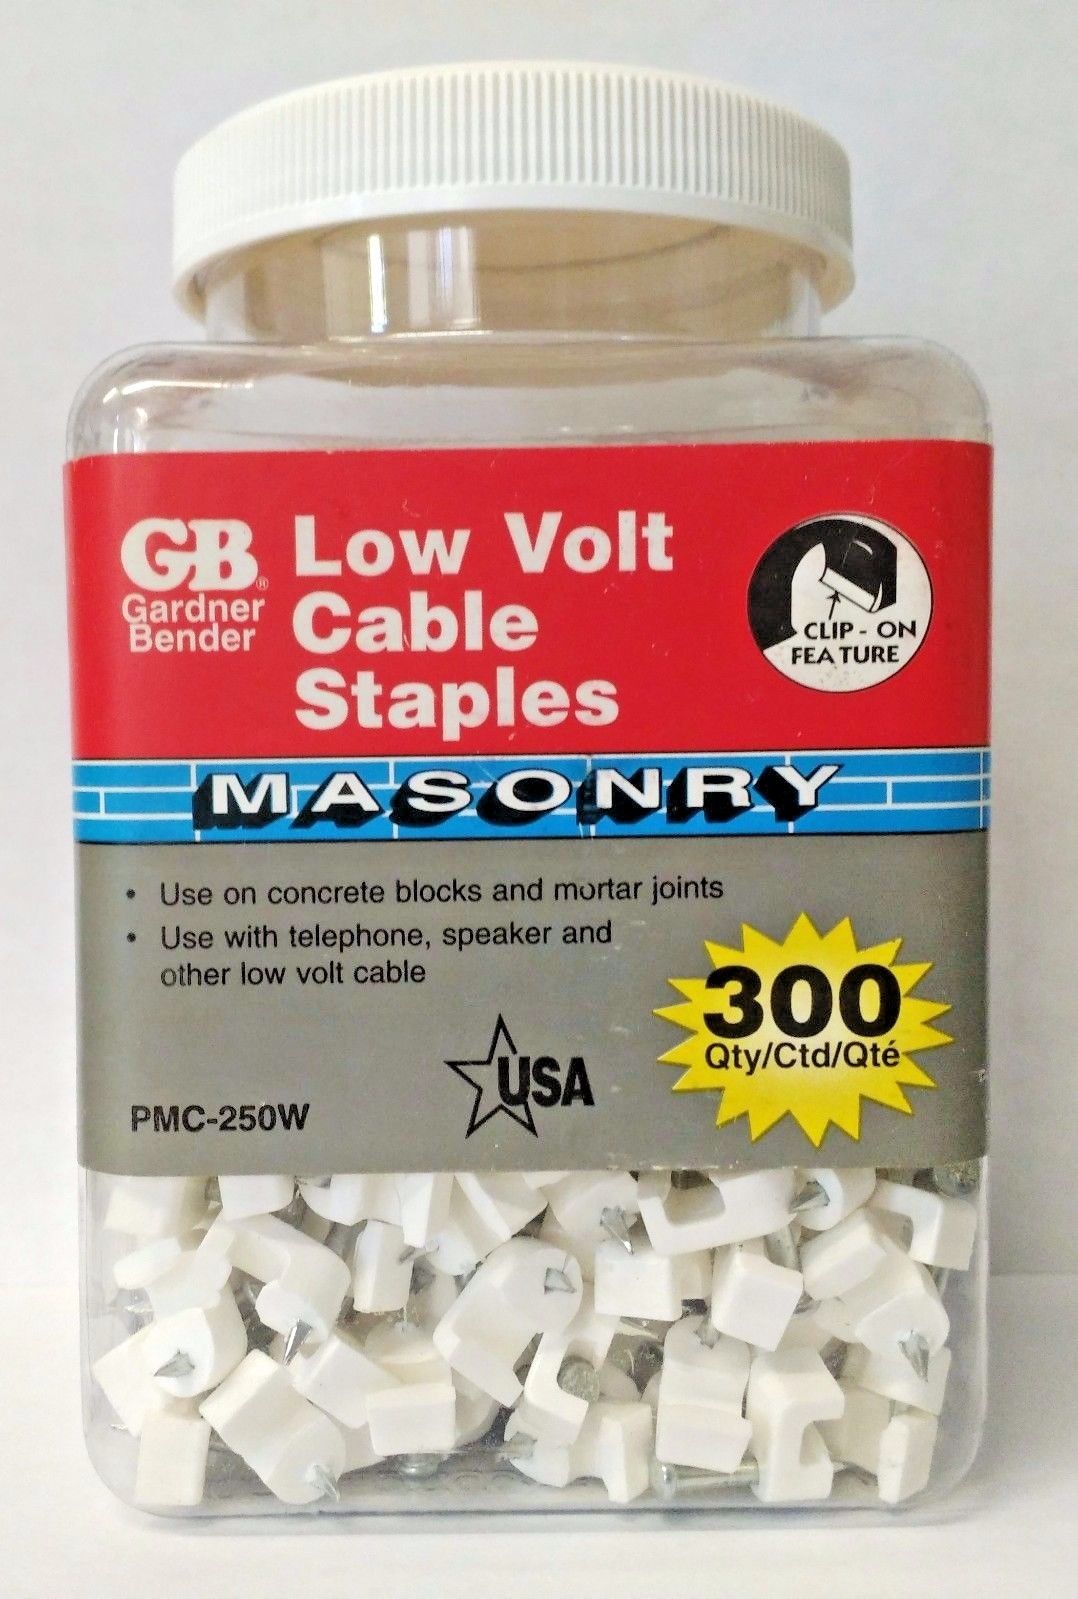 Gardner Bender PMC-250W Plastic Low Volt Masonry Cable Staples 300 Pack USA